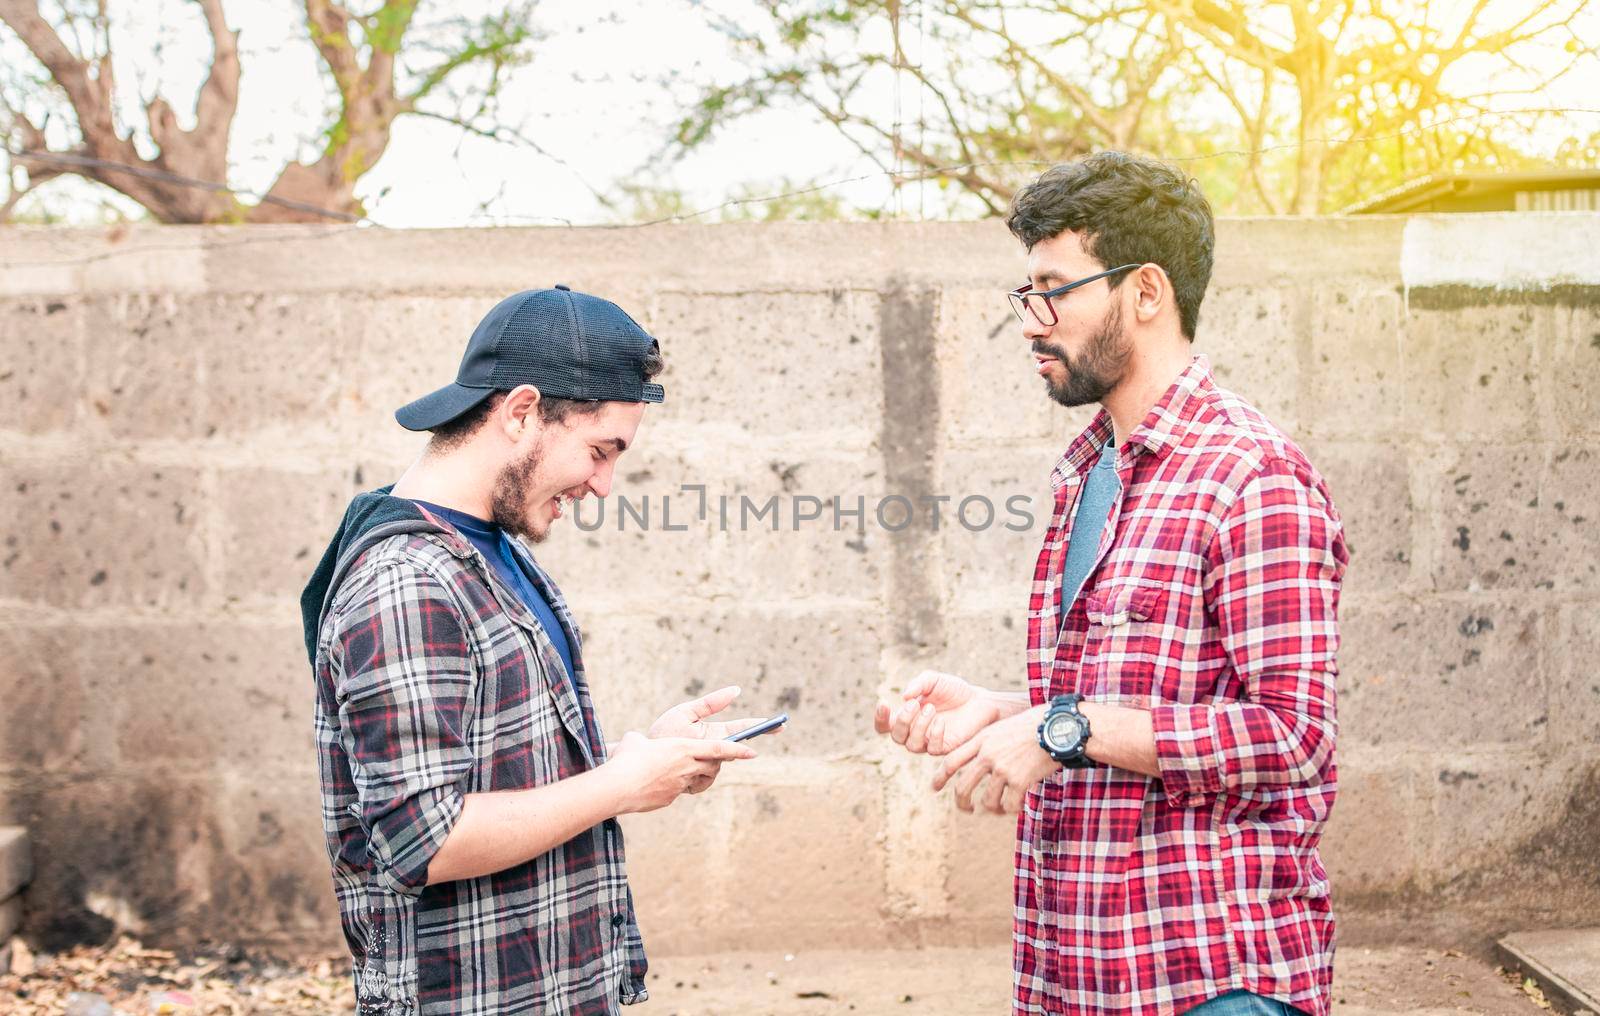 Two young people having a conversation outdoors, two friends having a conversation, concept of respect and friendly conversation